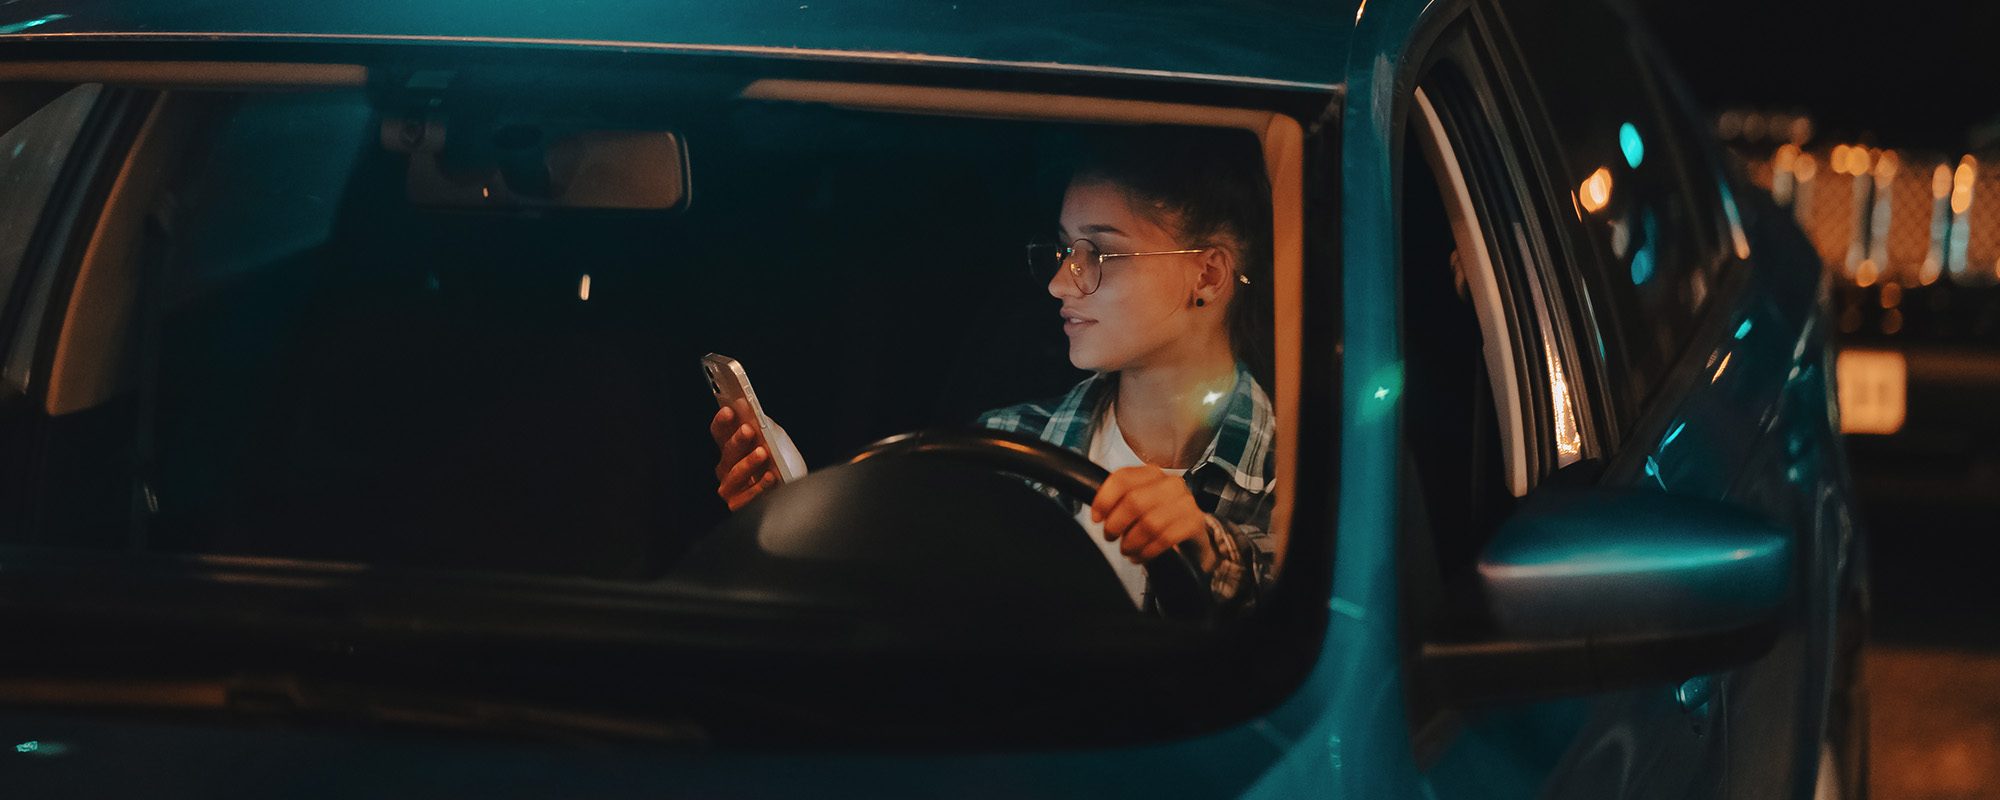 lost female driver using mobile phone while driving at night.